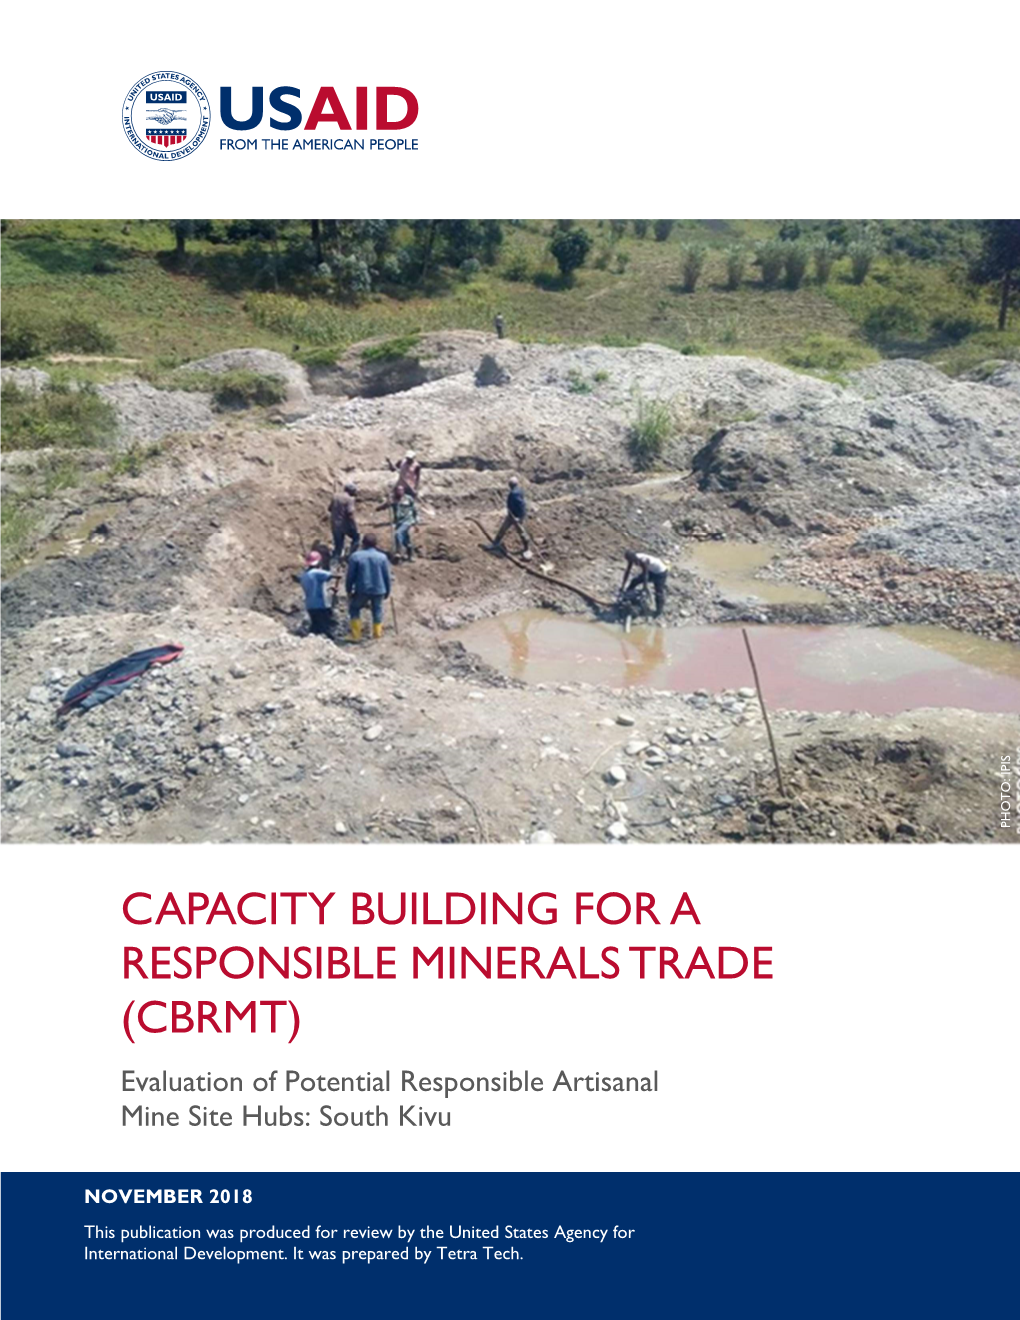 CAPACITY BUILDING for a RESPONSIBLE MINERALS TRADE (CBRMT) Evaluation of Potential Responsible Artisanal Mine Site Hubs: South Kivu